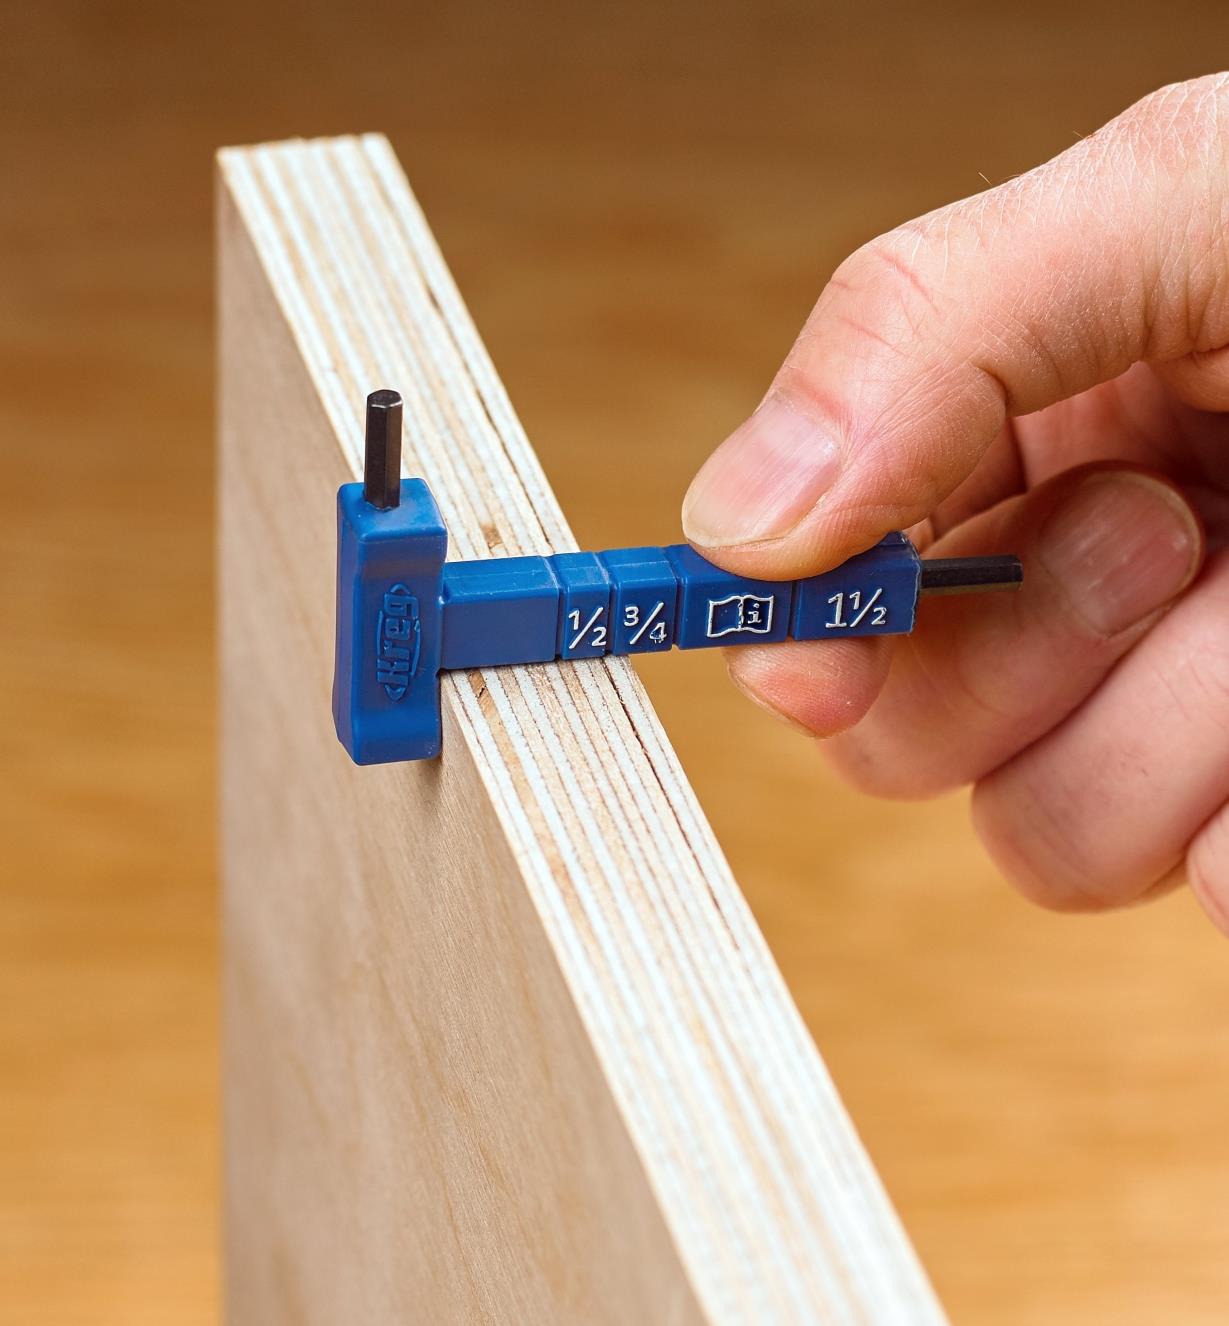 The Kreg material-thickness gauge being used to check the thickness of a plywood panel